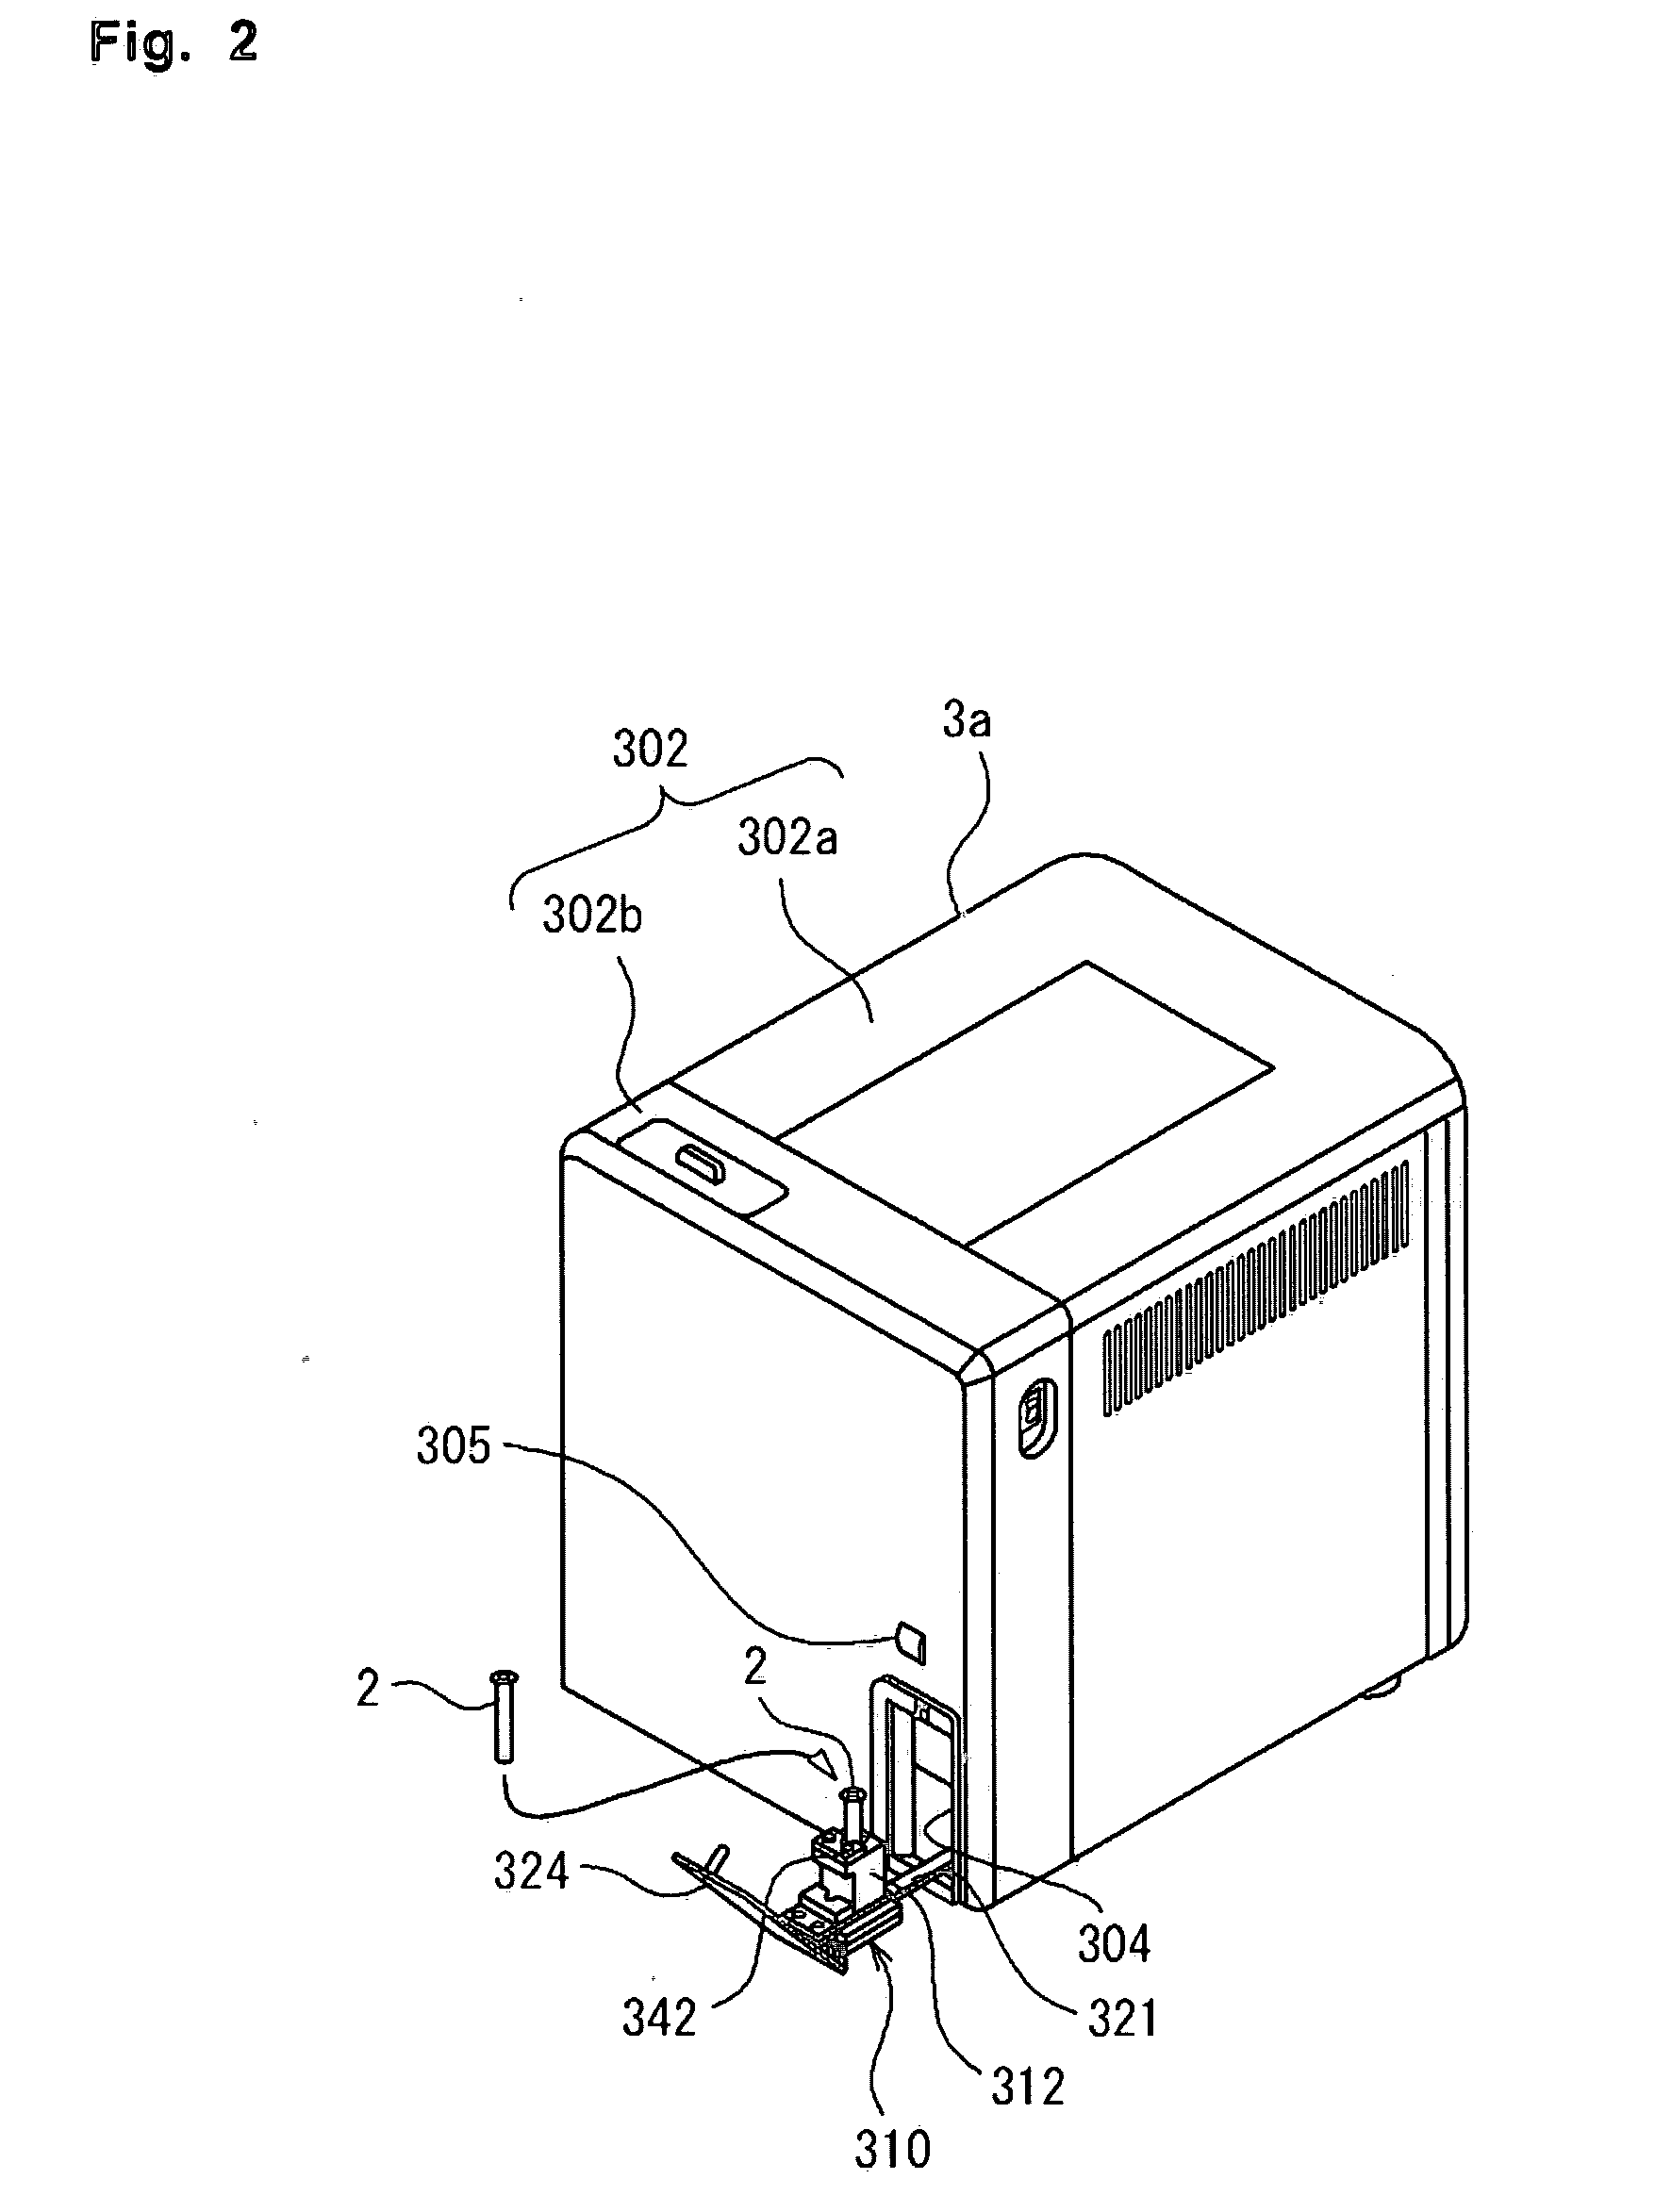 Sample analyzer and sample container supplying apparatus